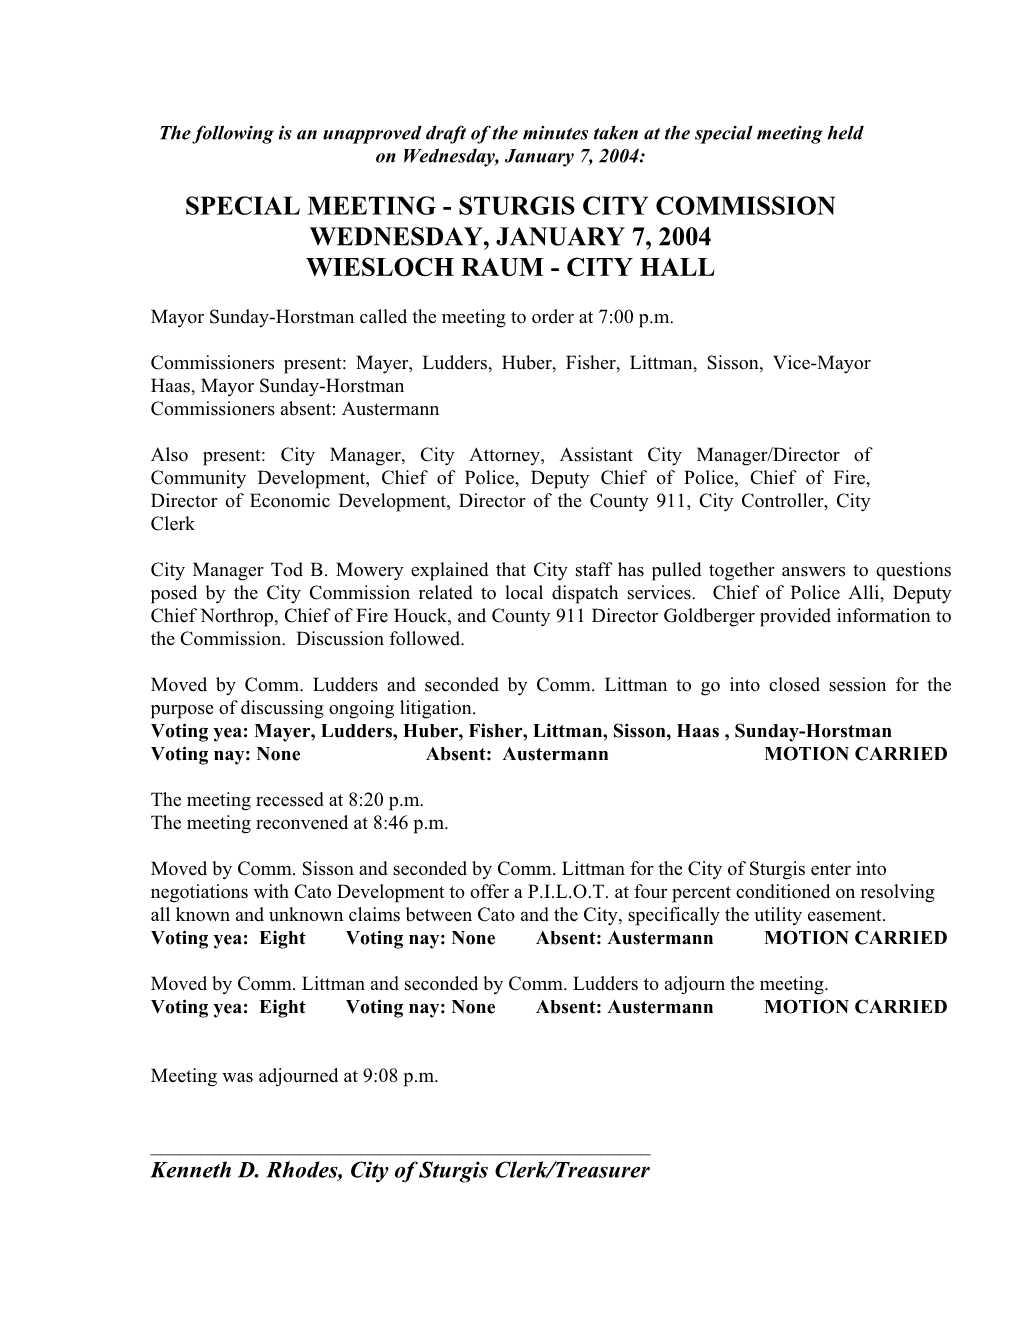 The Following Is an Unapproved Draft of the Minutes Taken at the Special Meeting Held on Wednesday, January 7, 2004